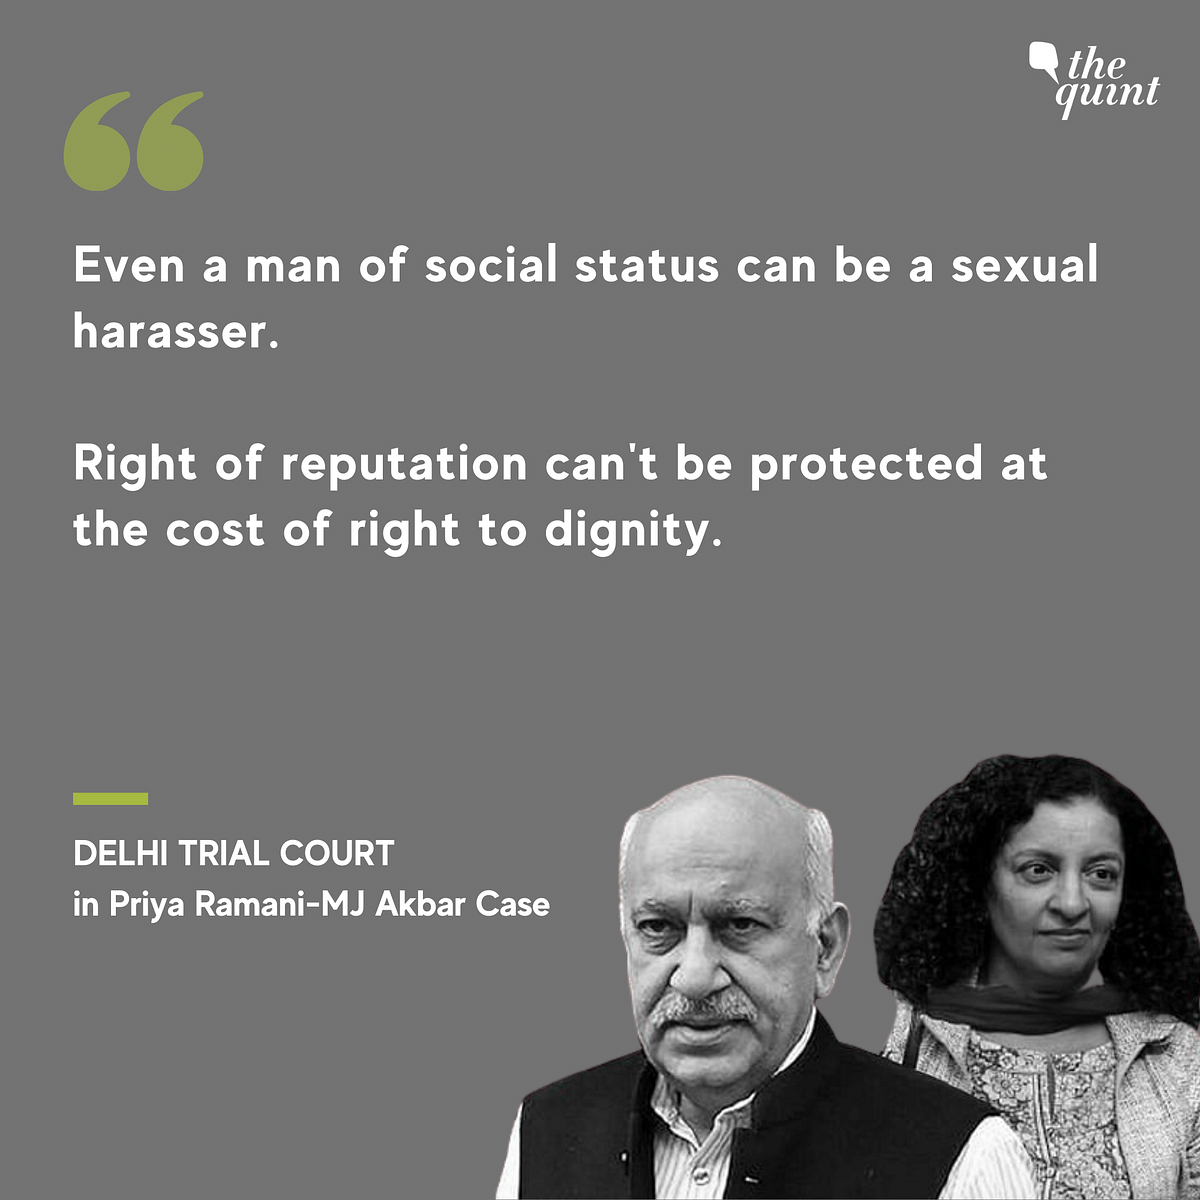 The Delhi court said that “even a man of social status can be a sexual harasser.”